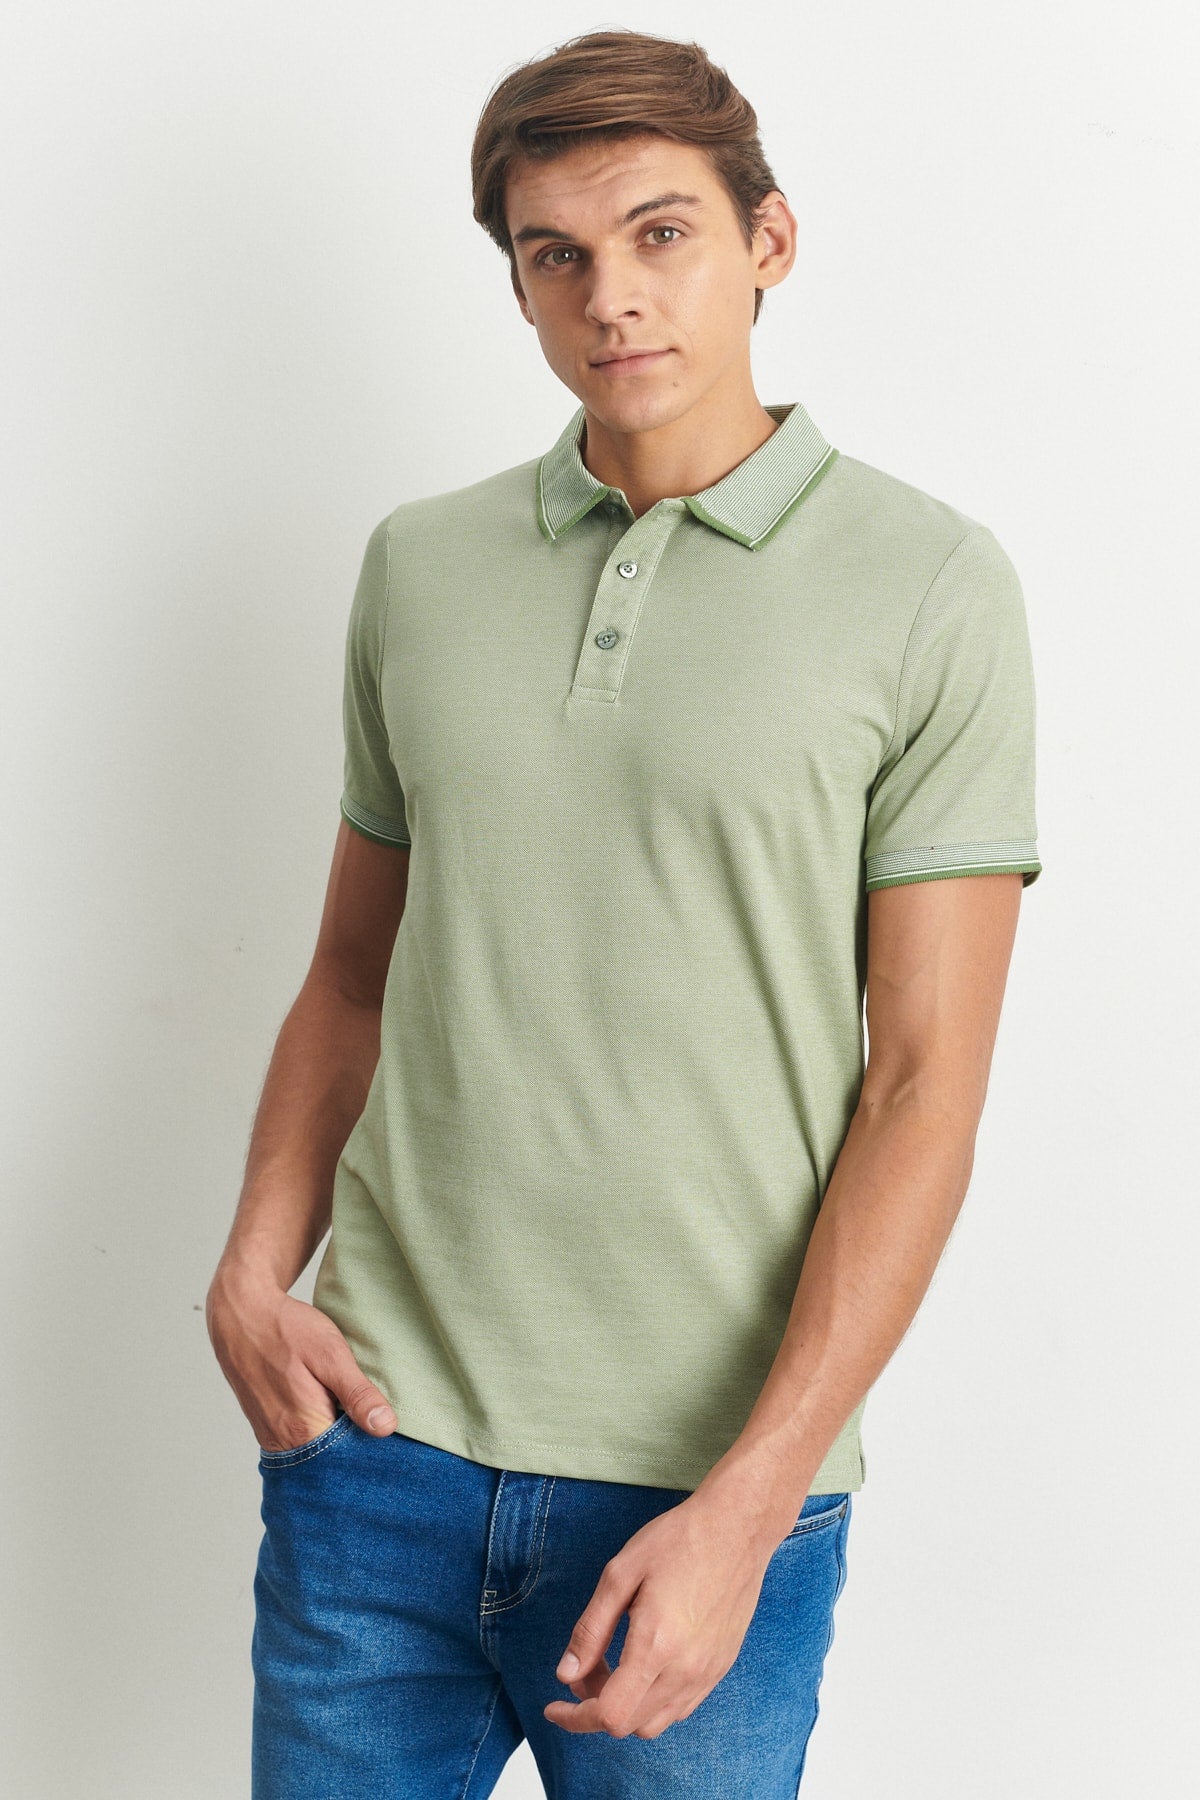 Men's Non-Shrink Cotton Fabric Slim Fit Slim Fit Green Roll-Up Polo Neck T-Shirt